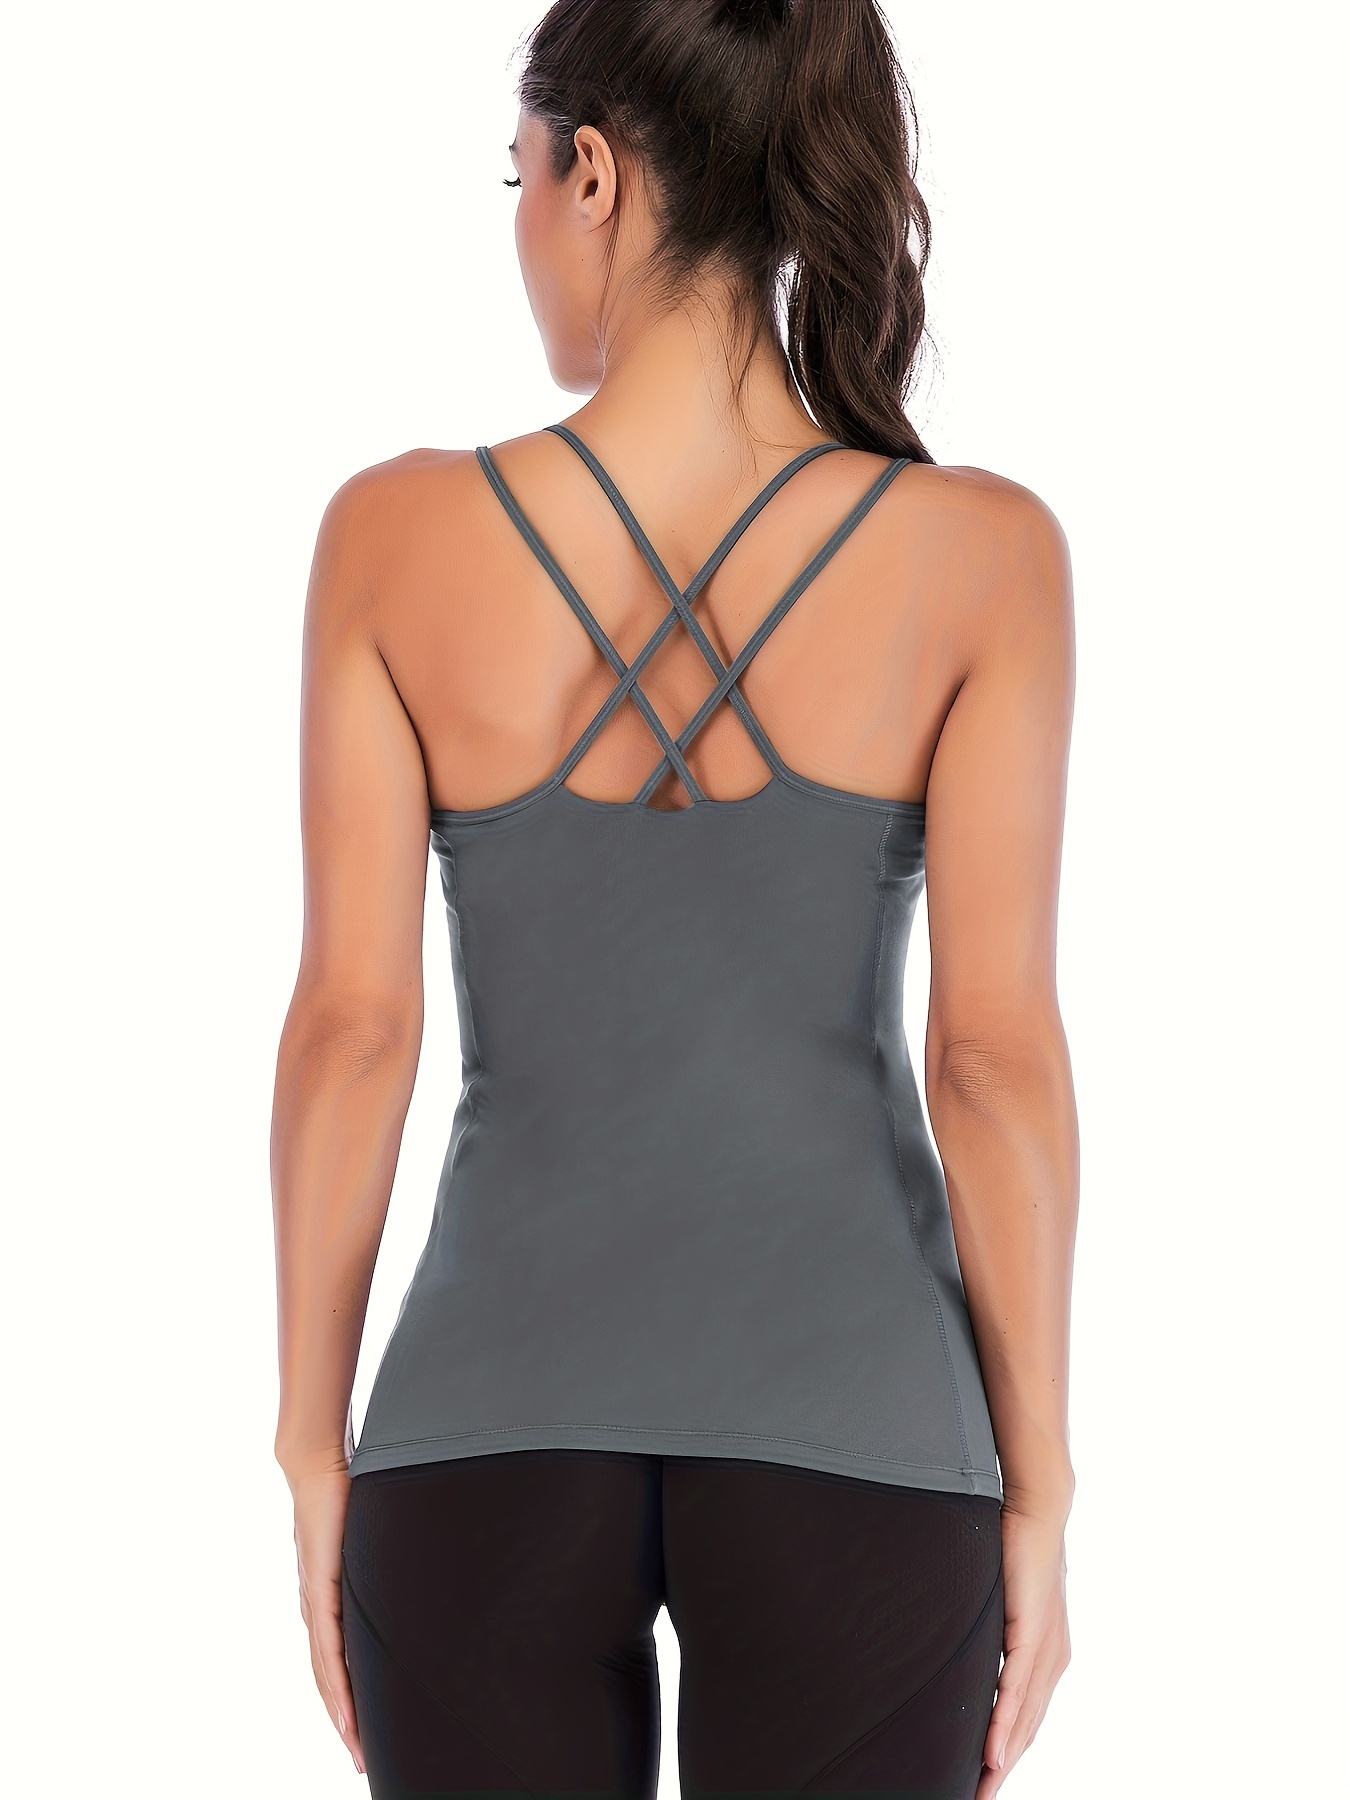 Women's Yoga Tops With Built In Bra Workout Gym Tank Tops Sports  Vest-black(xl)